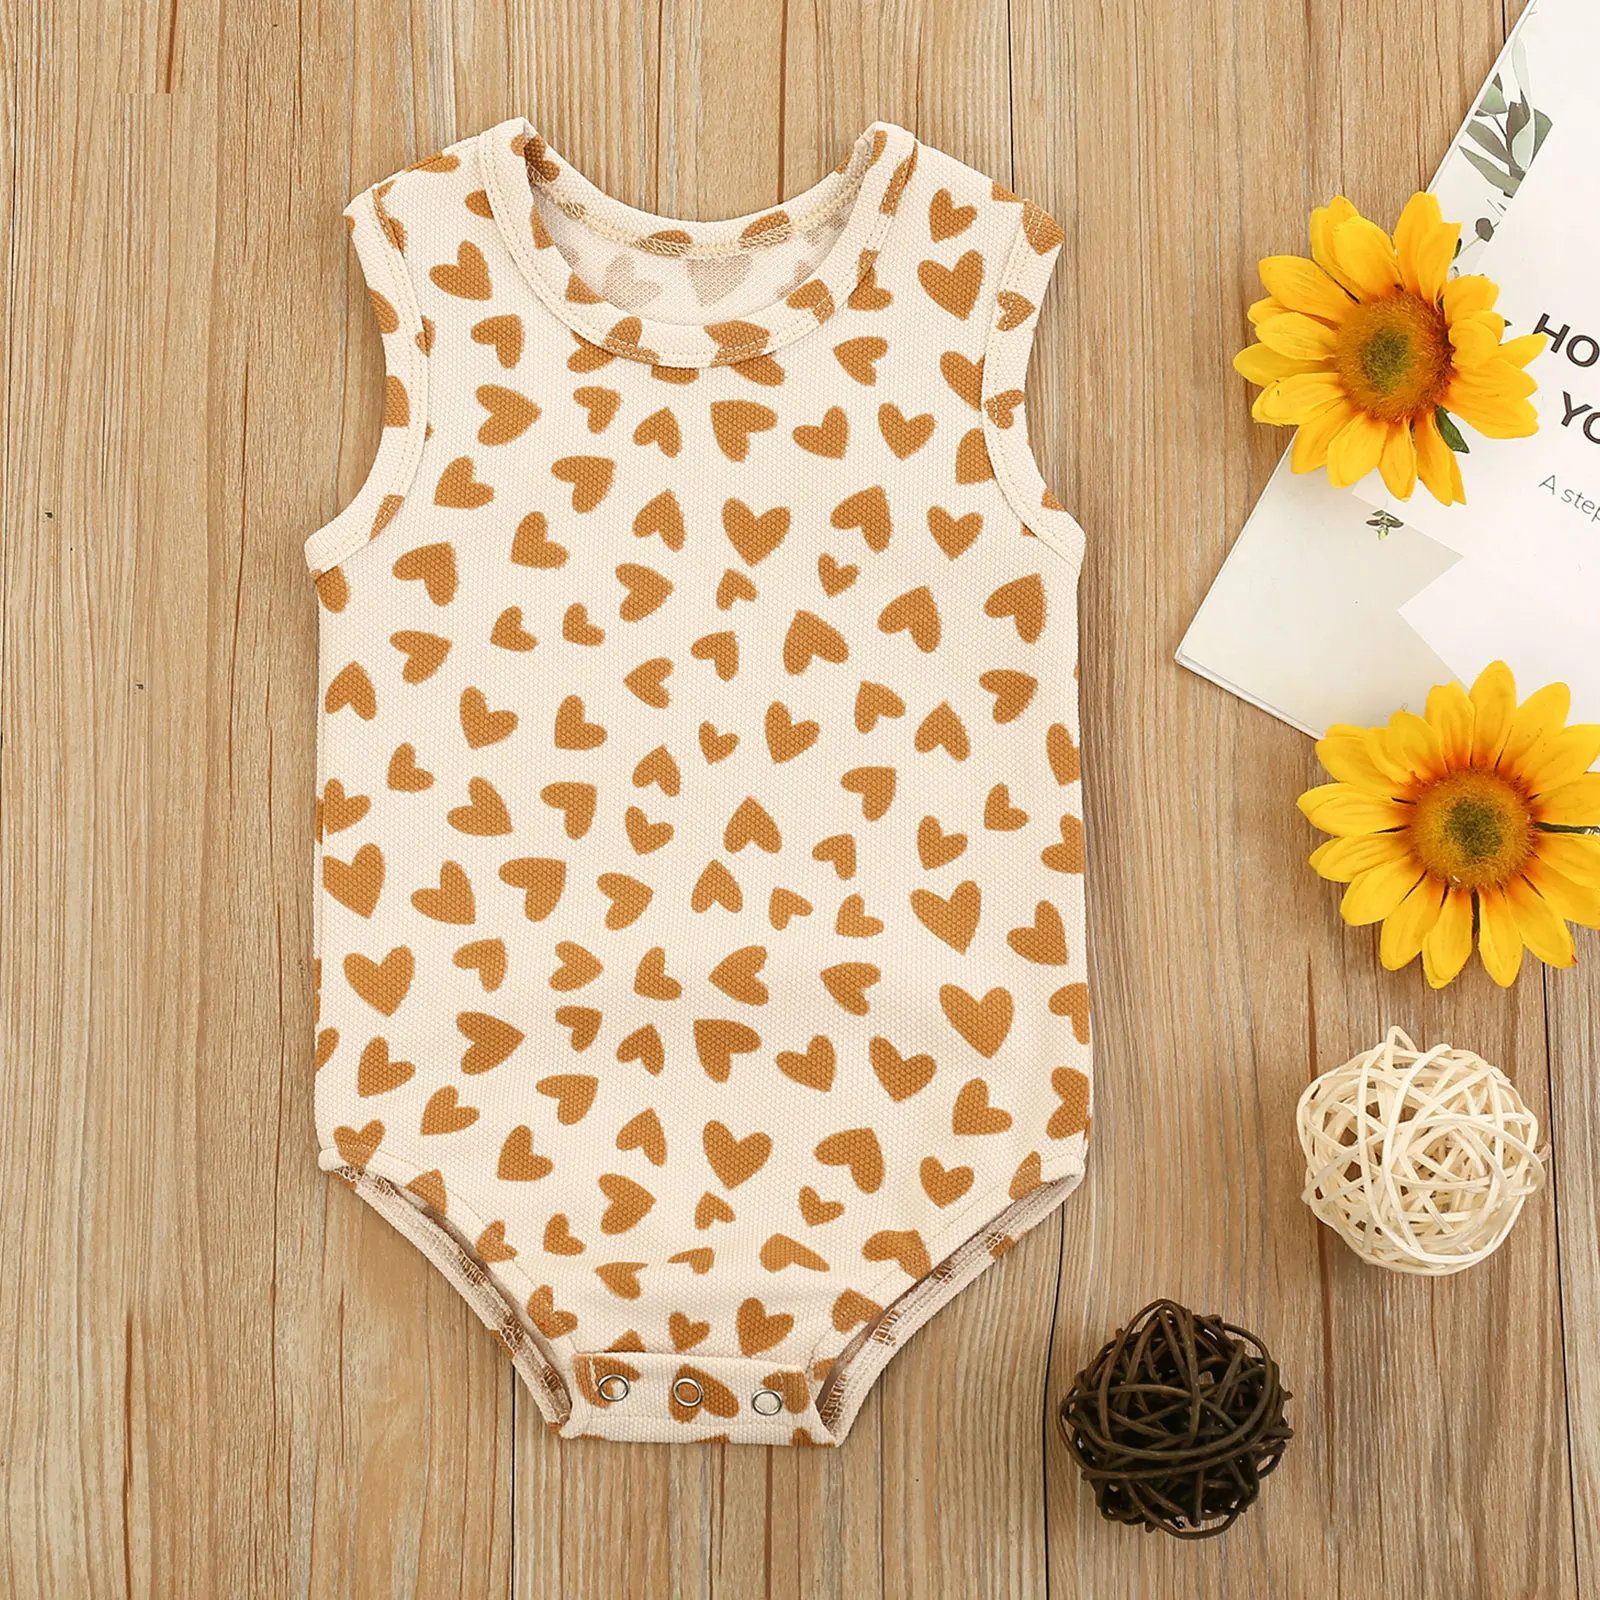 2021 0-24M Cute Toddler Baby Girl Romper Hearts Print Vest Sleeveless Summer Outfit Playsuit Jumpsuit Outfit best Baby Bodysuits